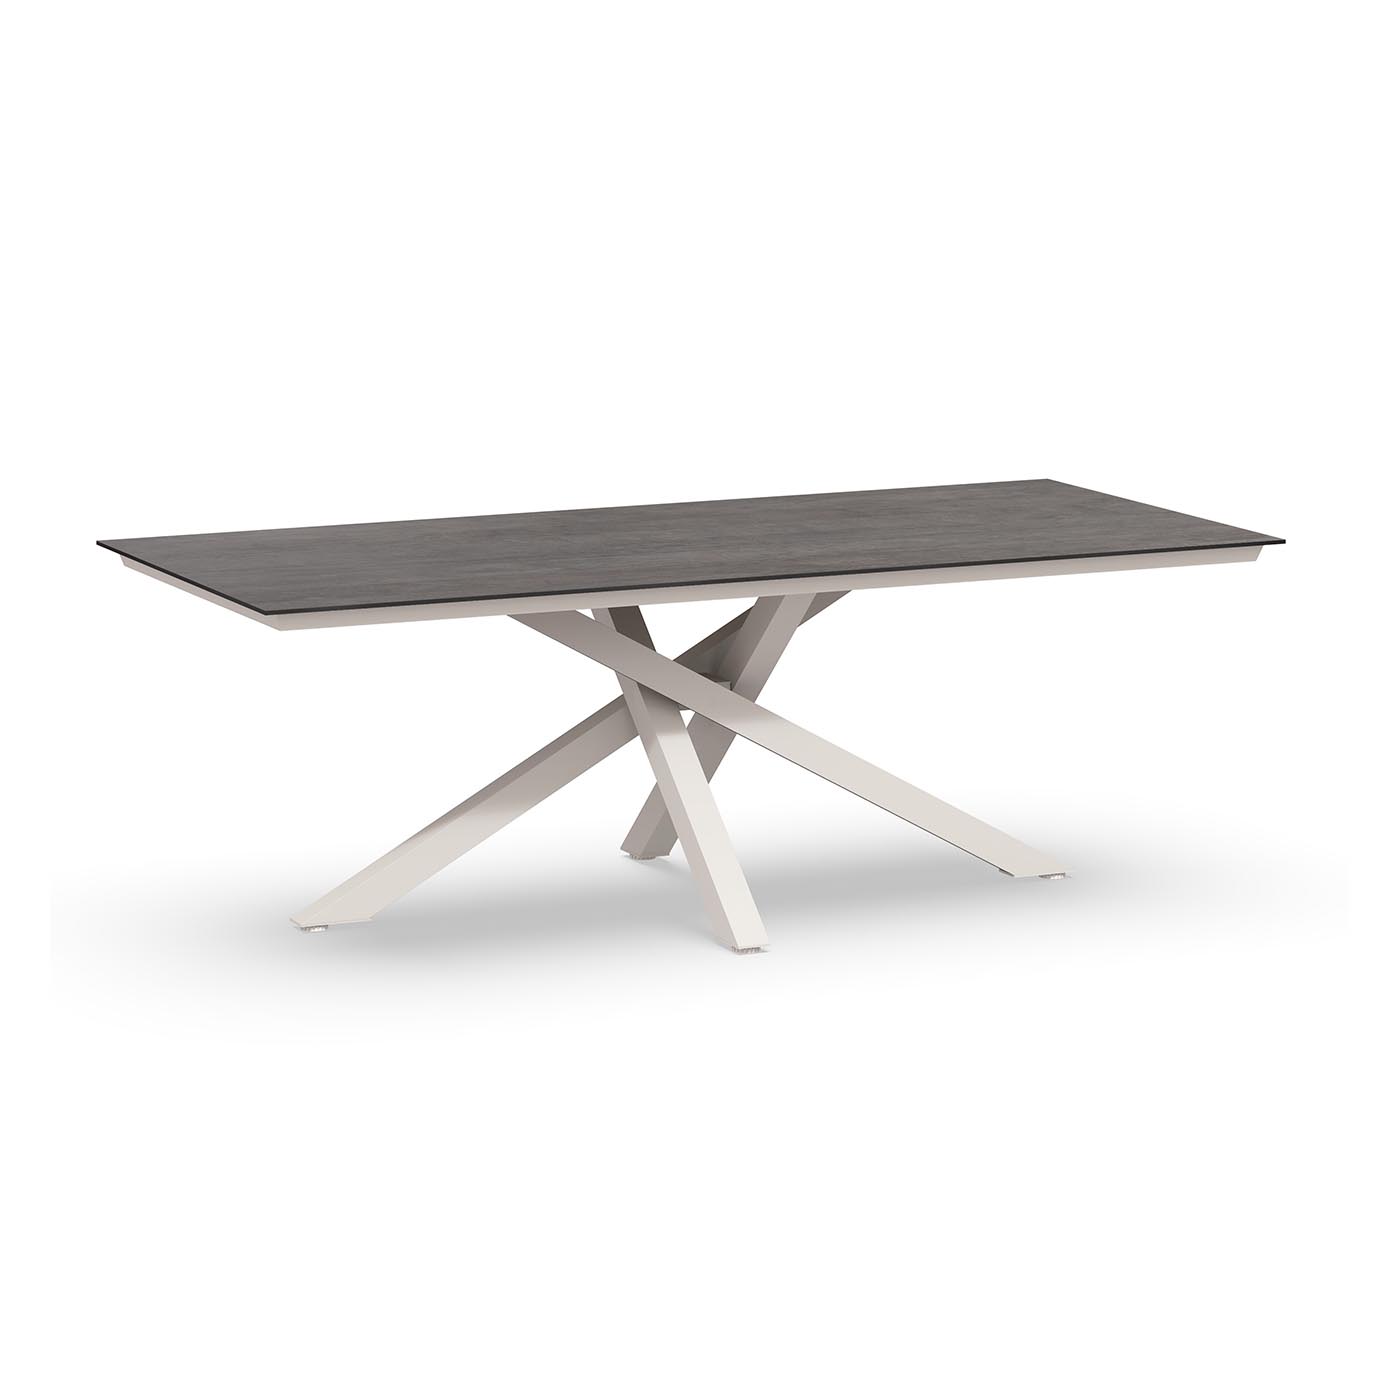 Orion Dining Table Trespa Forest Grey 220 x 100 cm Creme White